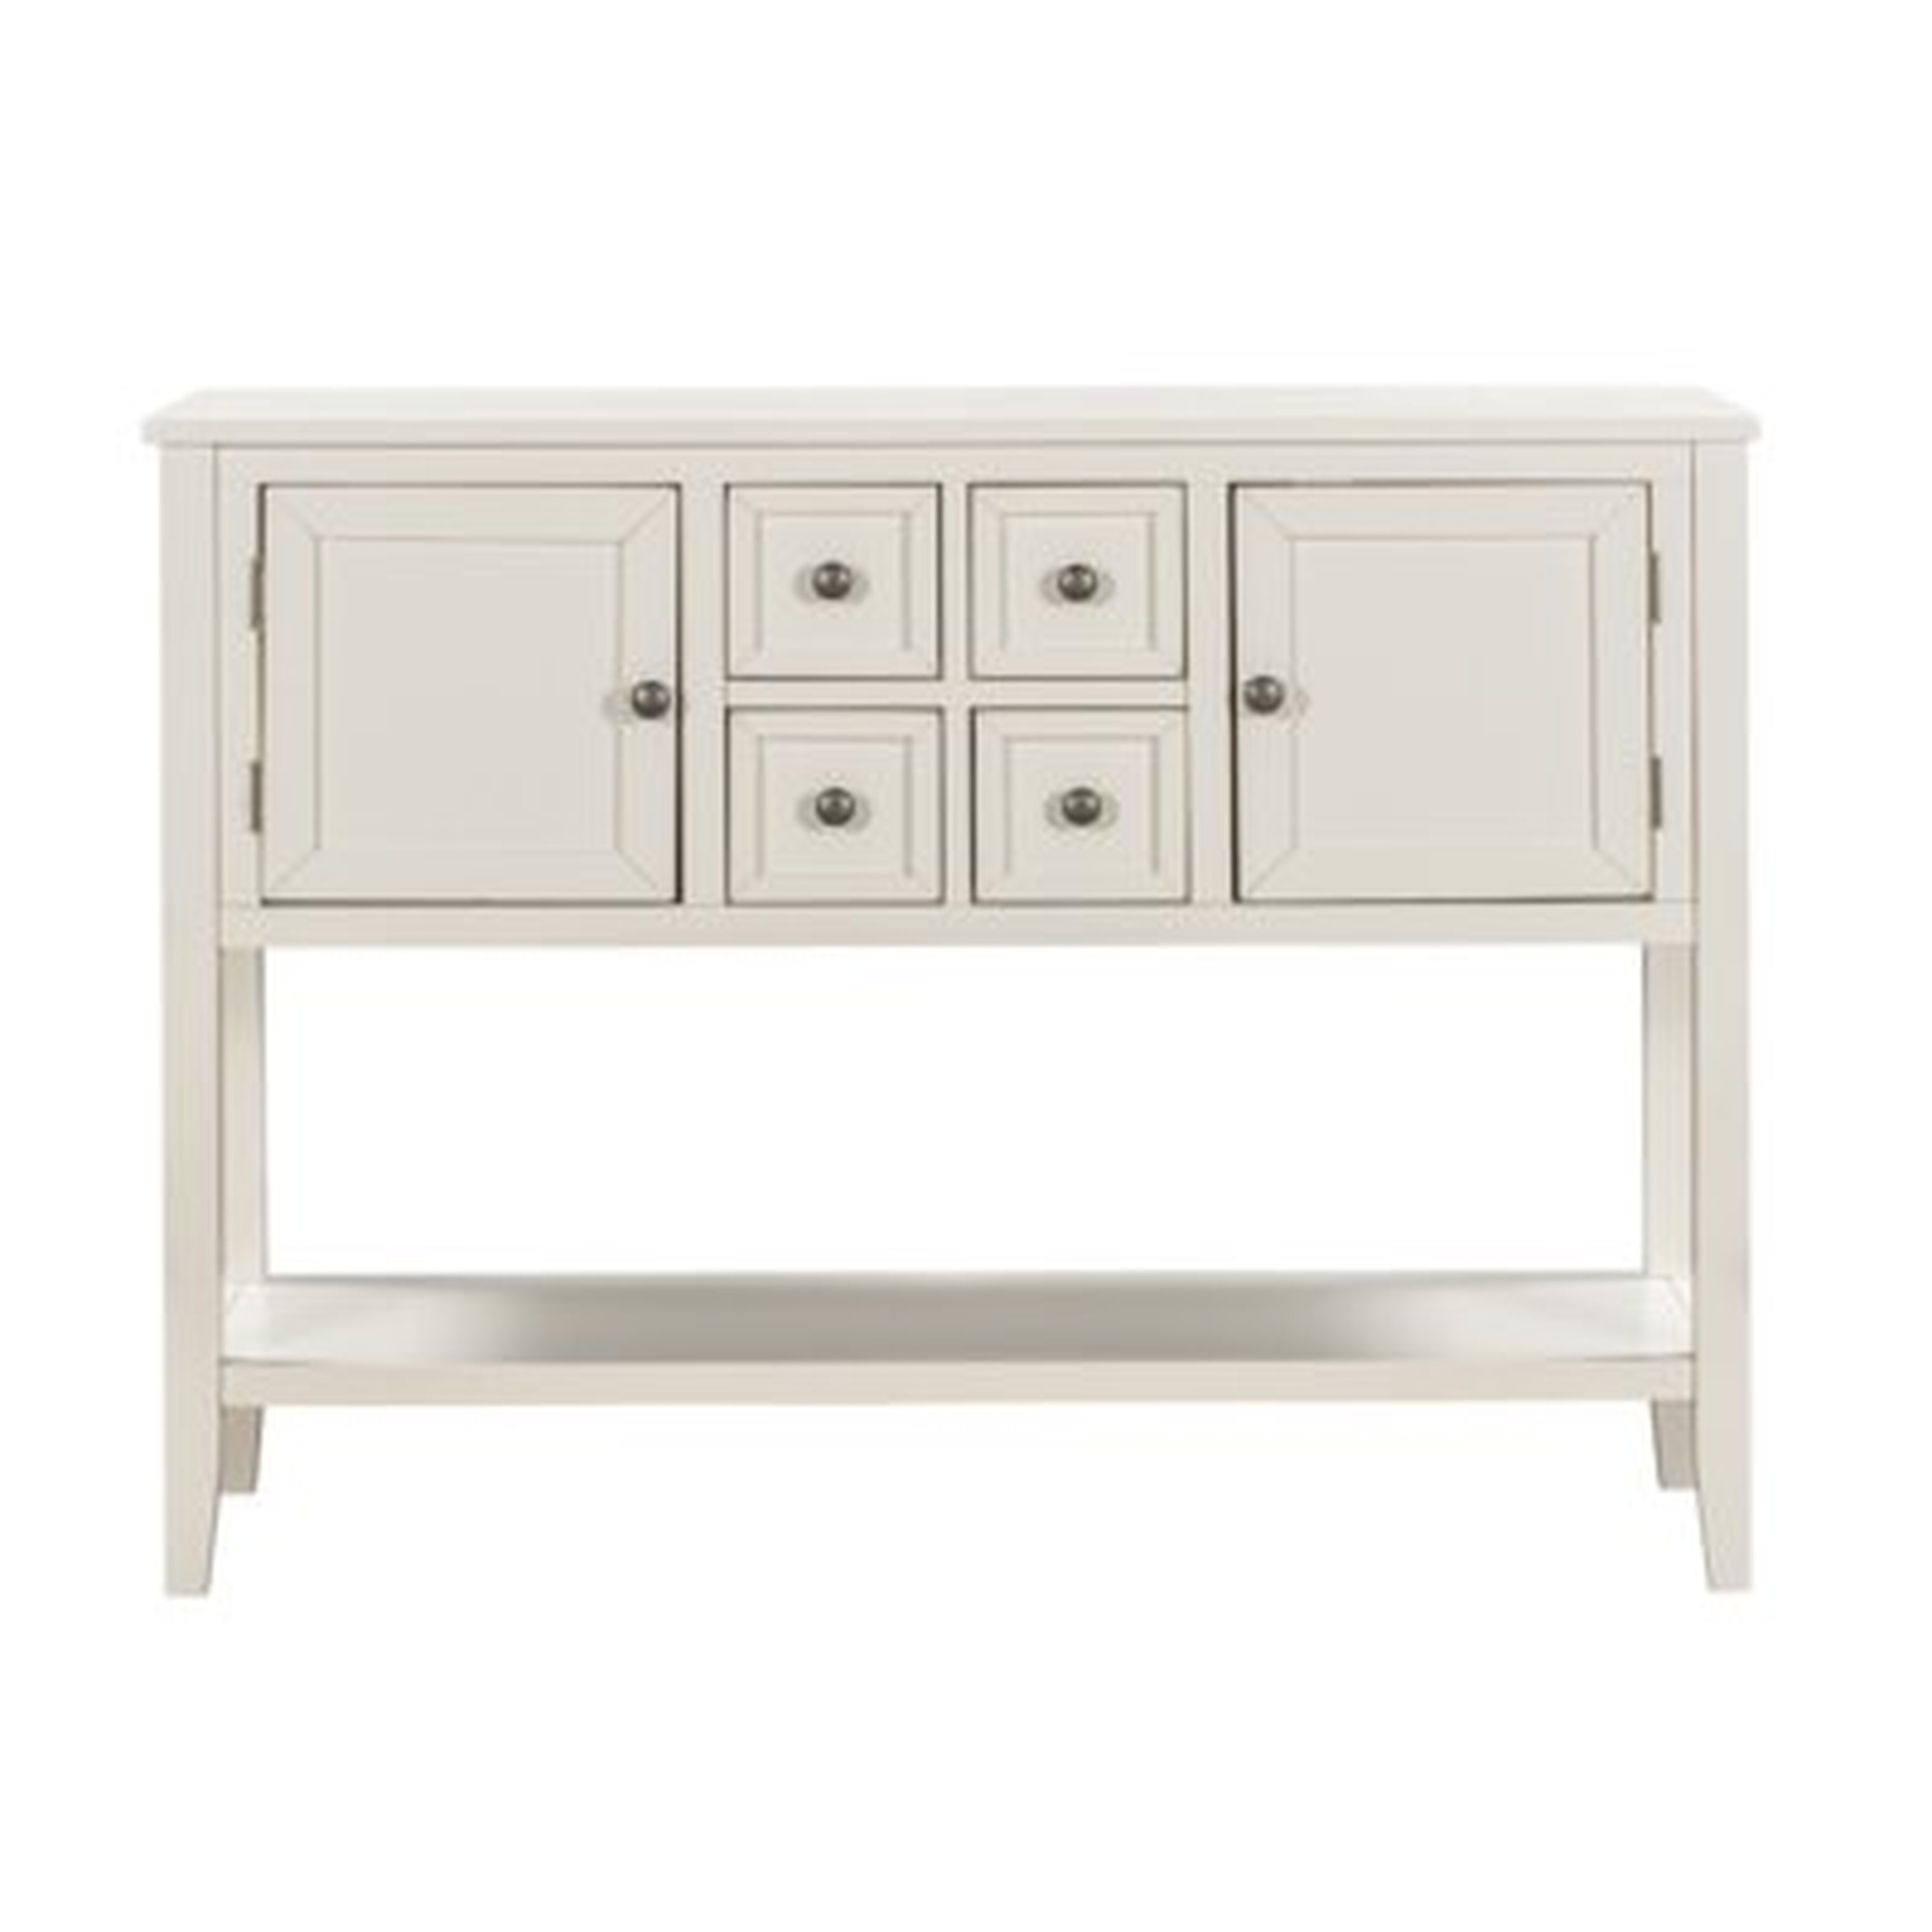 Modern  Sideboard Wood Console Table With Bottom Shelf And Drawers(White) - Wayfair